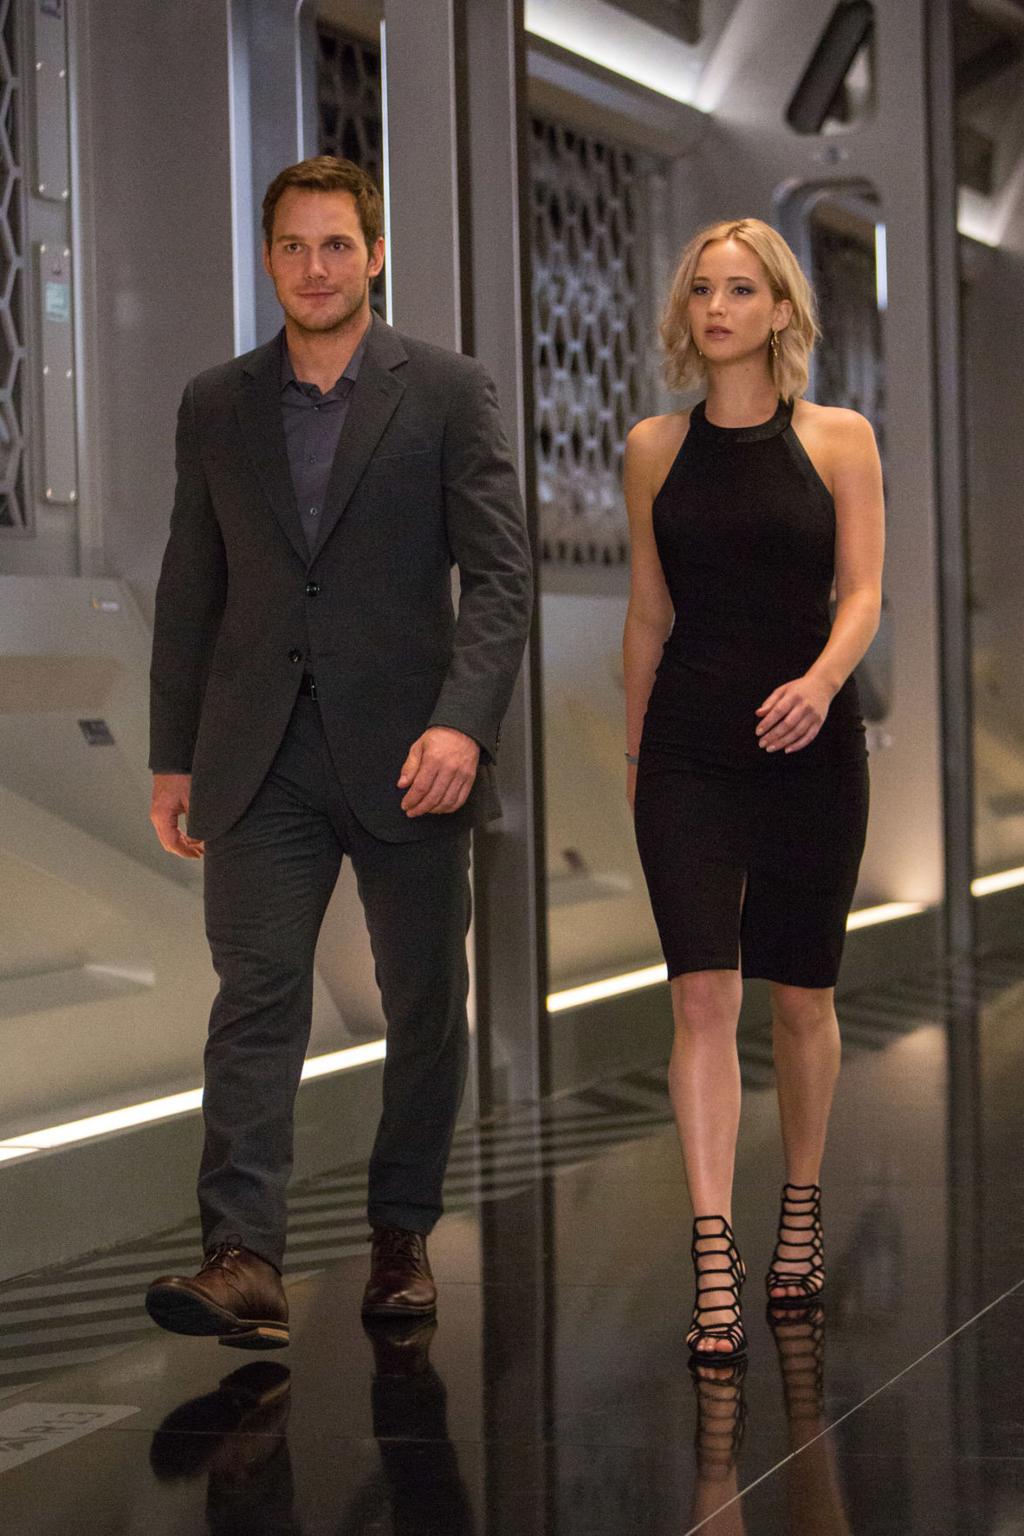 Passengers' movie review: Cast helps make sci-fi journey one worth